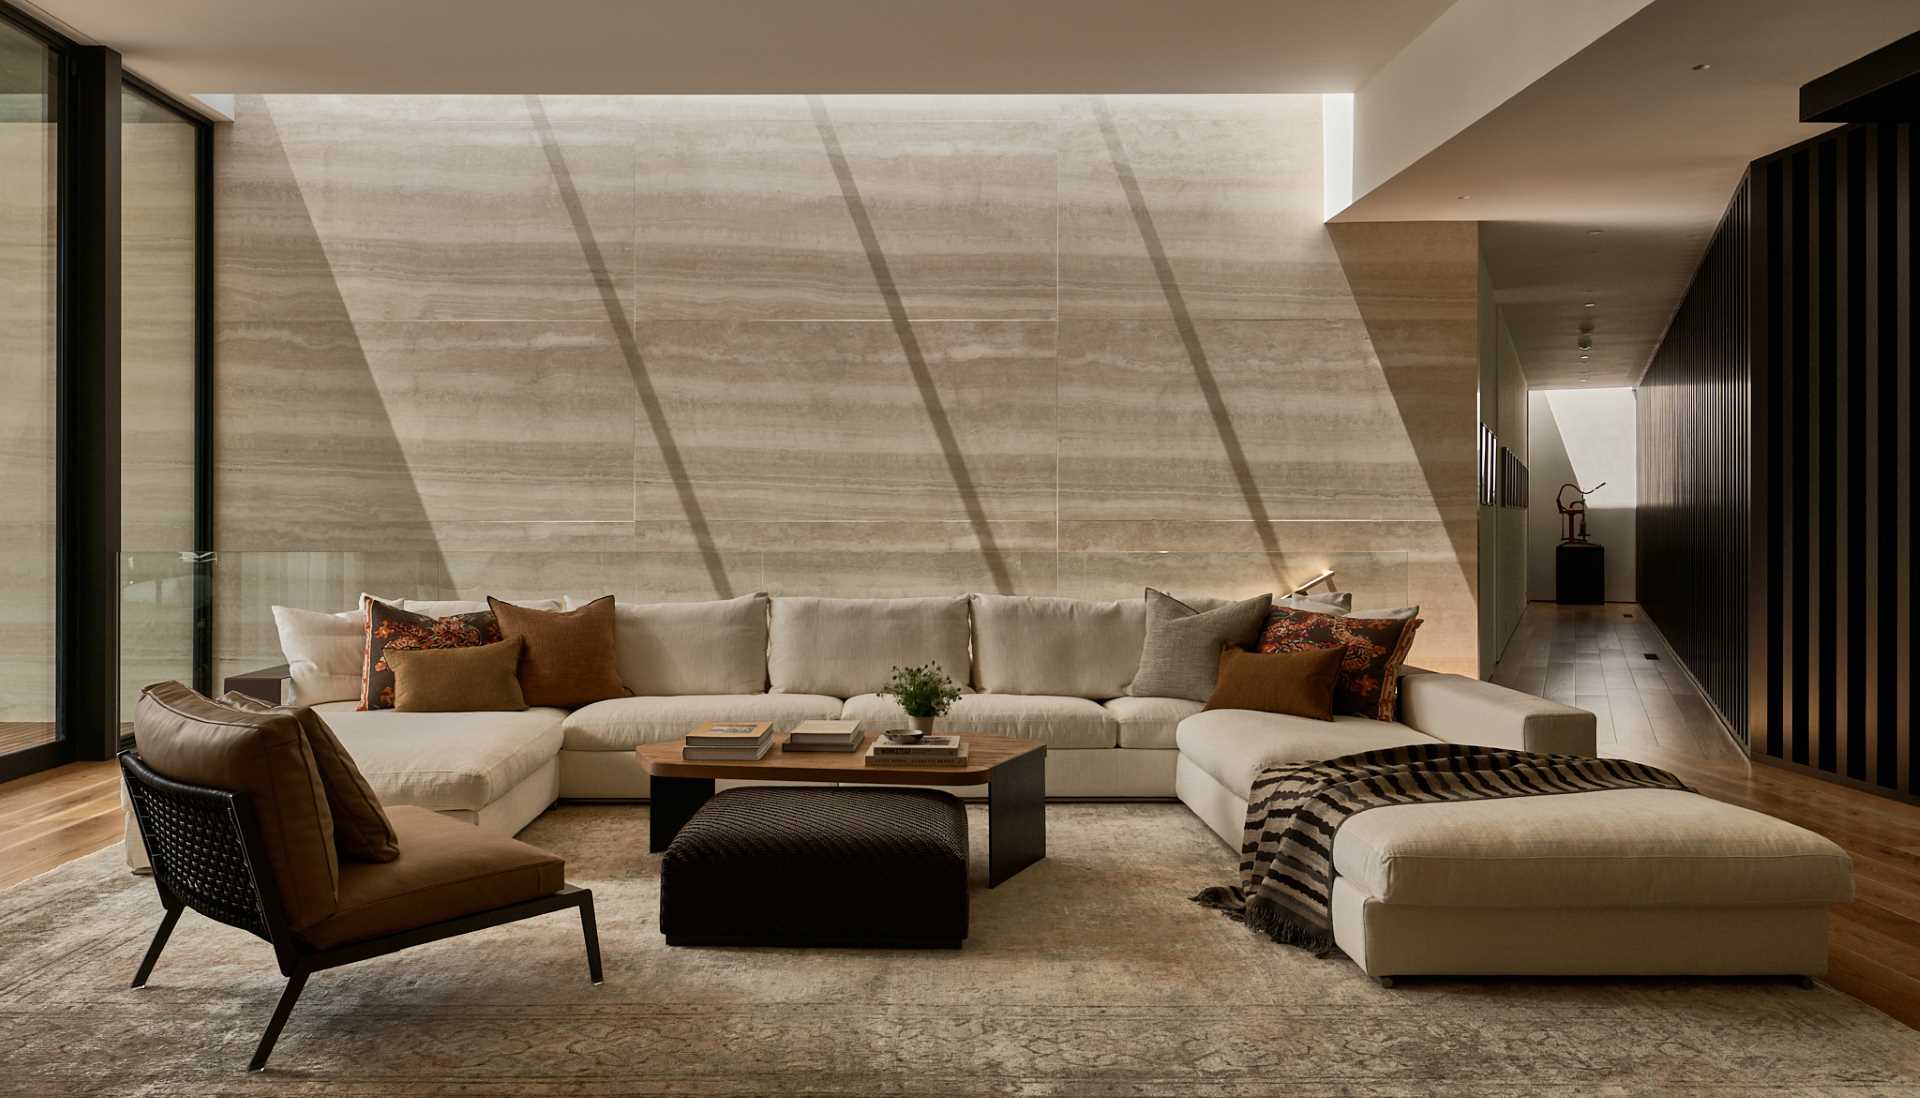 In this living room, a large couch provides ample seating, while the travertine wall adds a natural element to the space.